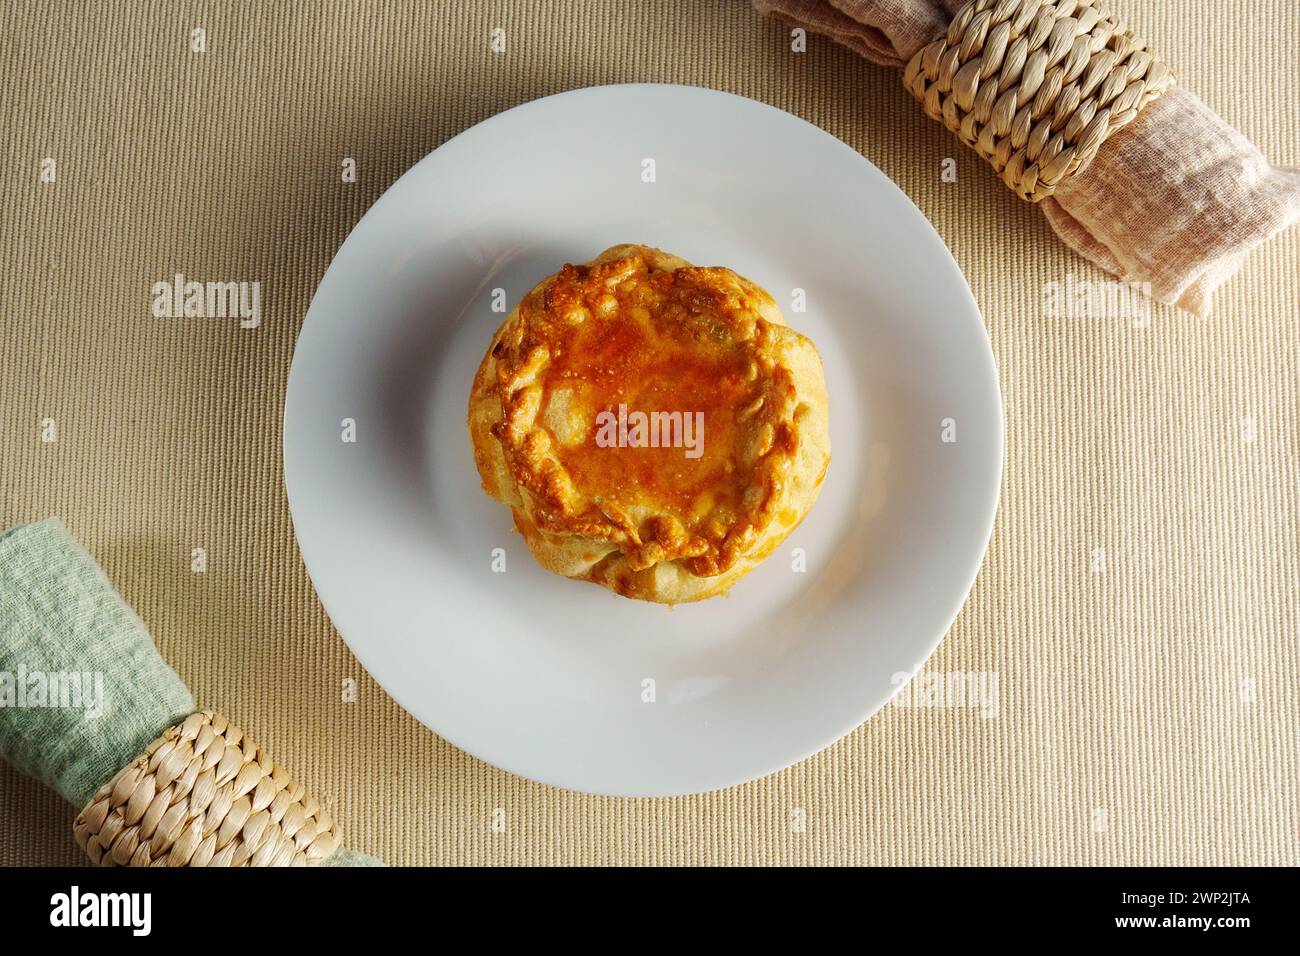 A Flaky Delight: A White Plate Showcasing a Delectable Pastry on a Mesmerizing Table Stock Photo